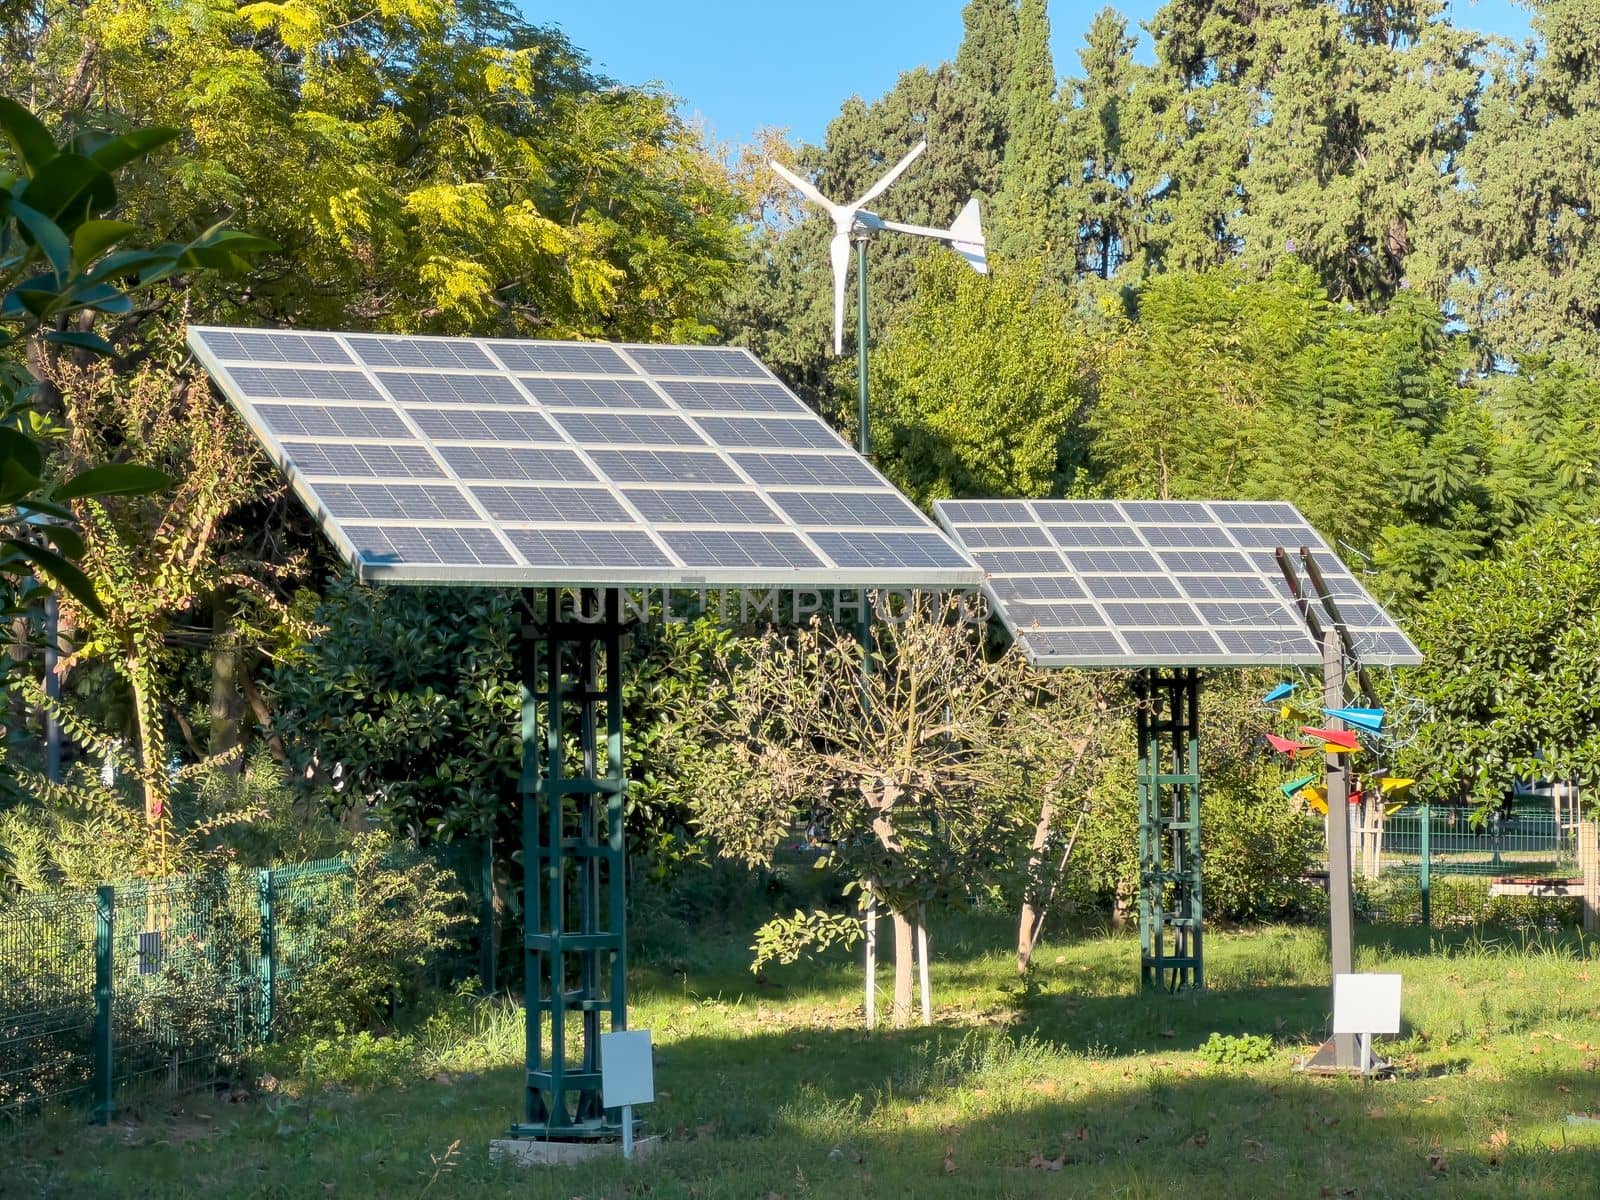 Wind turbine and solar panel installed in the green park area